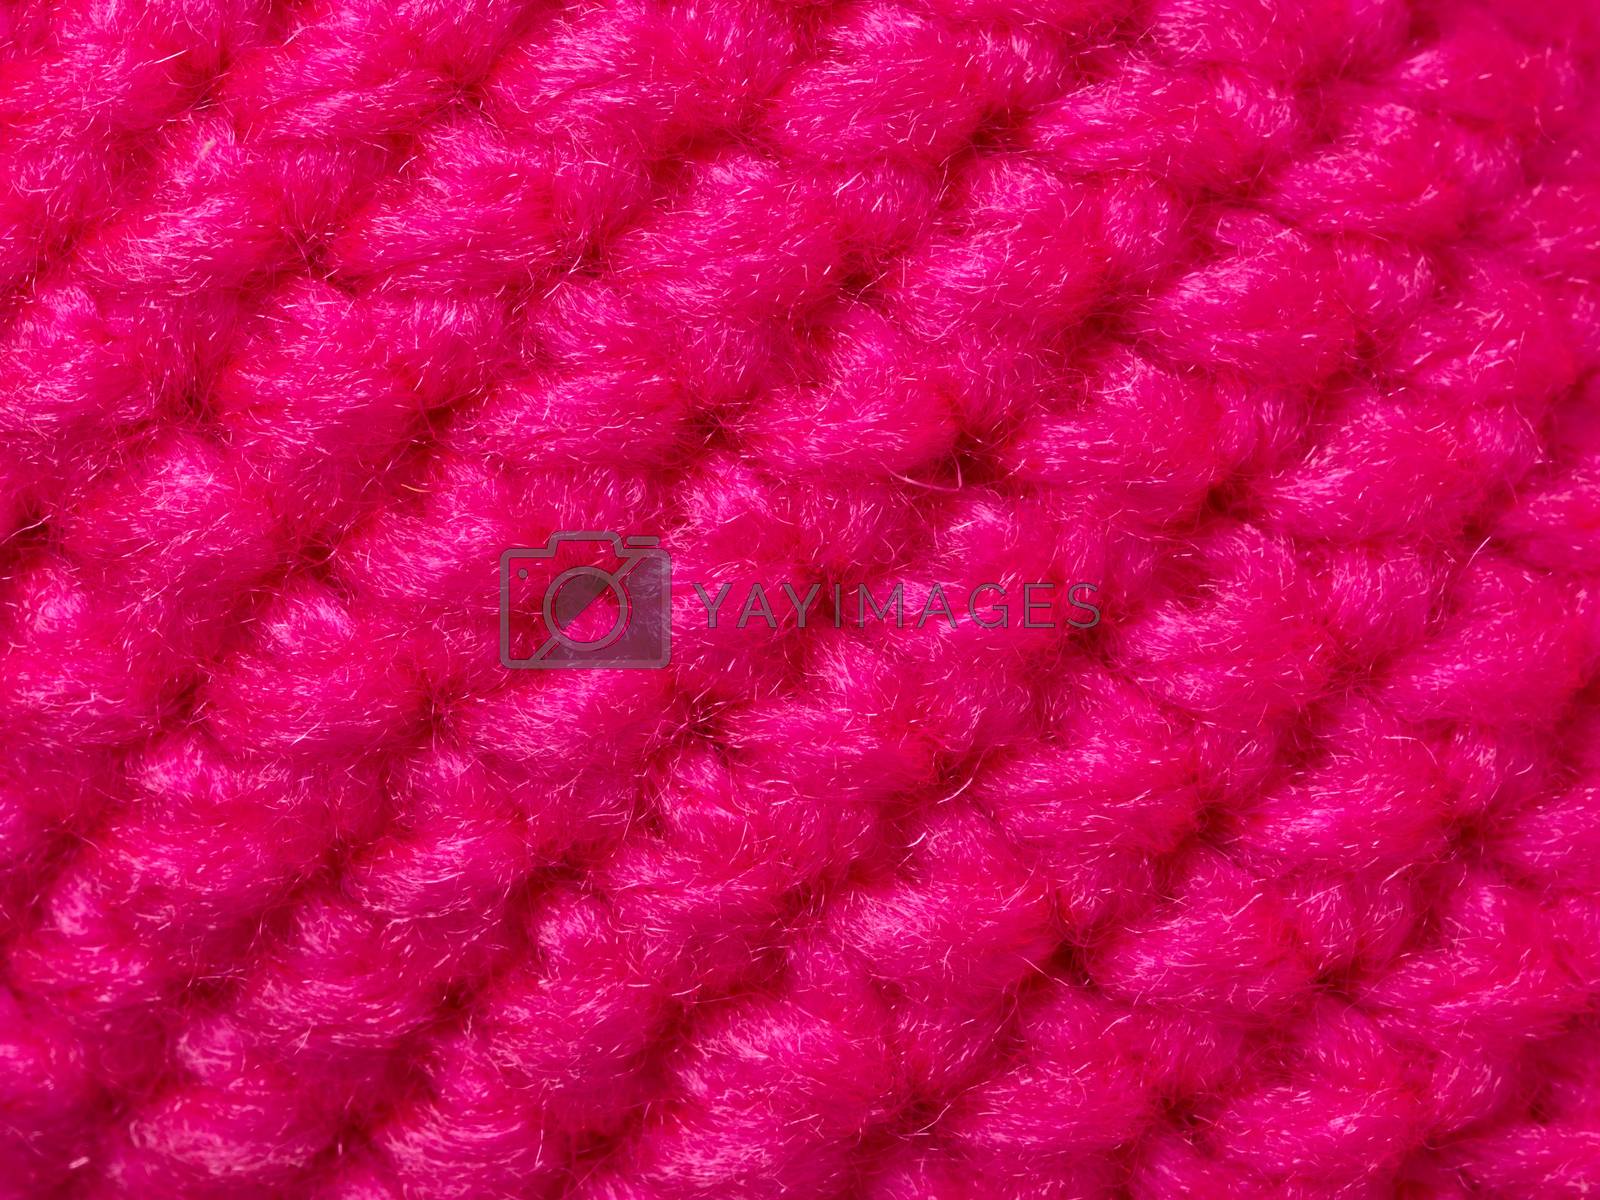 Royalty free image of neon pink fabric texture background by zkruger